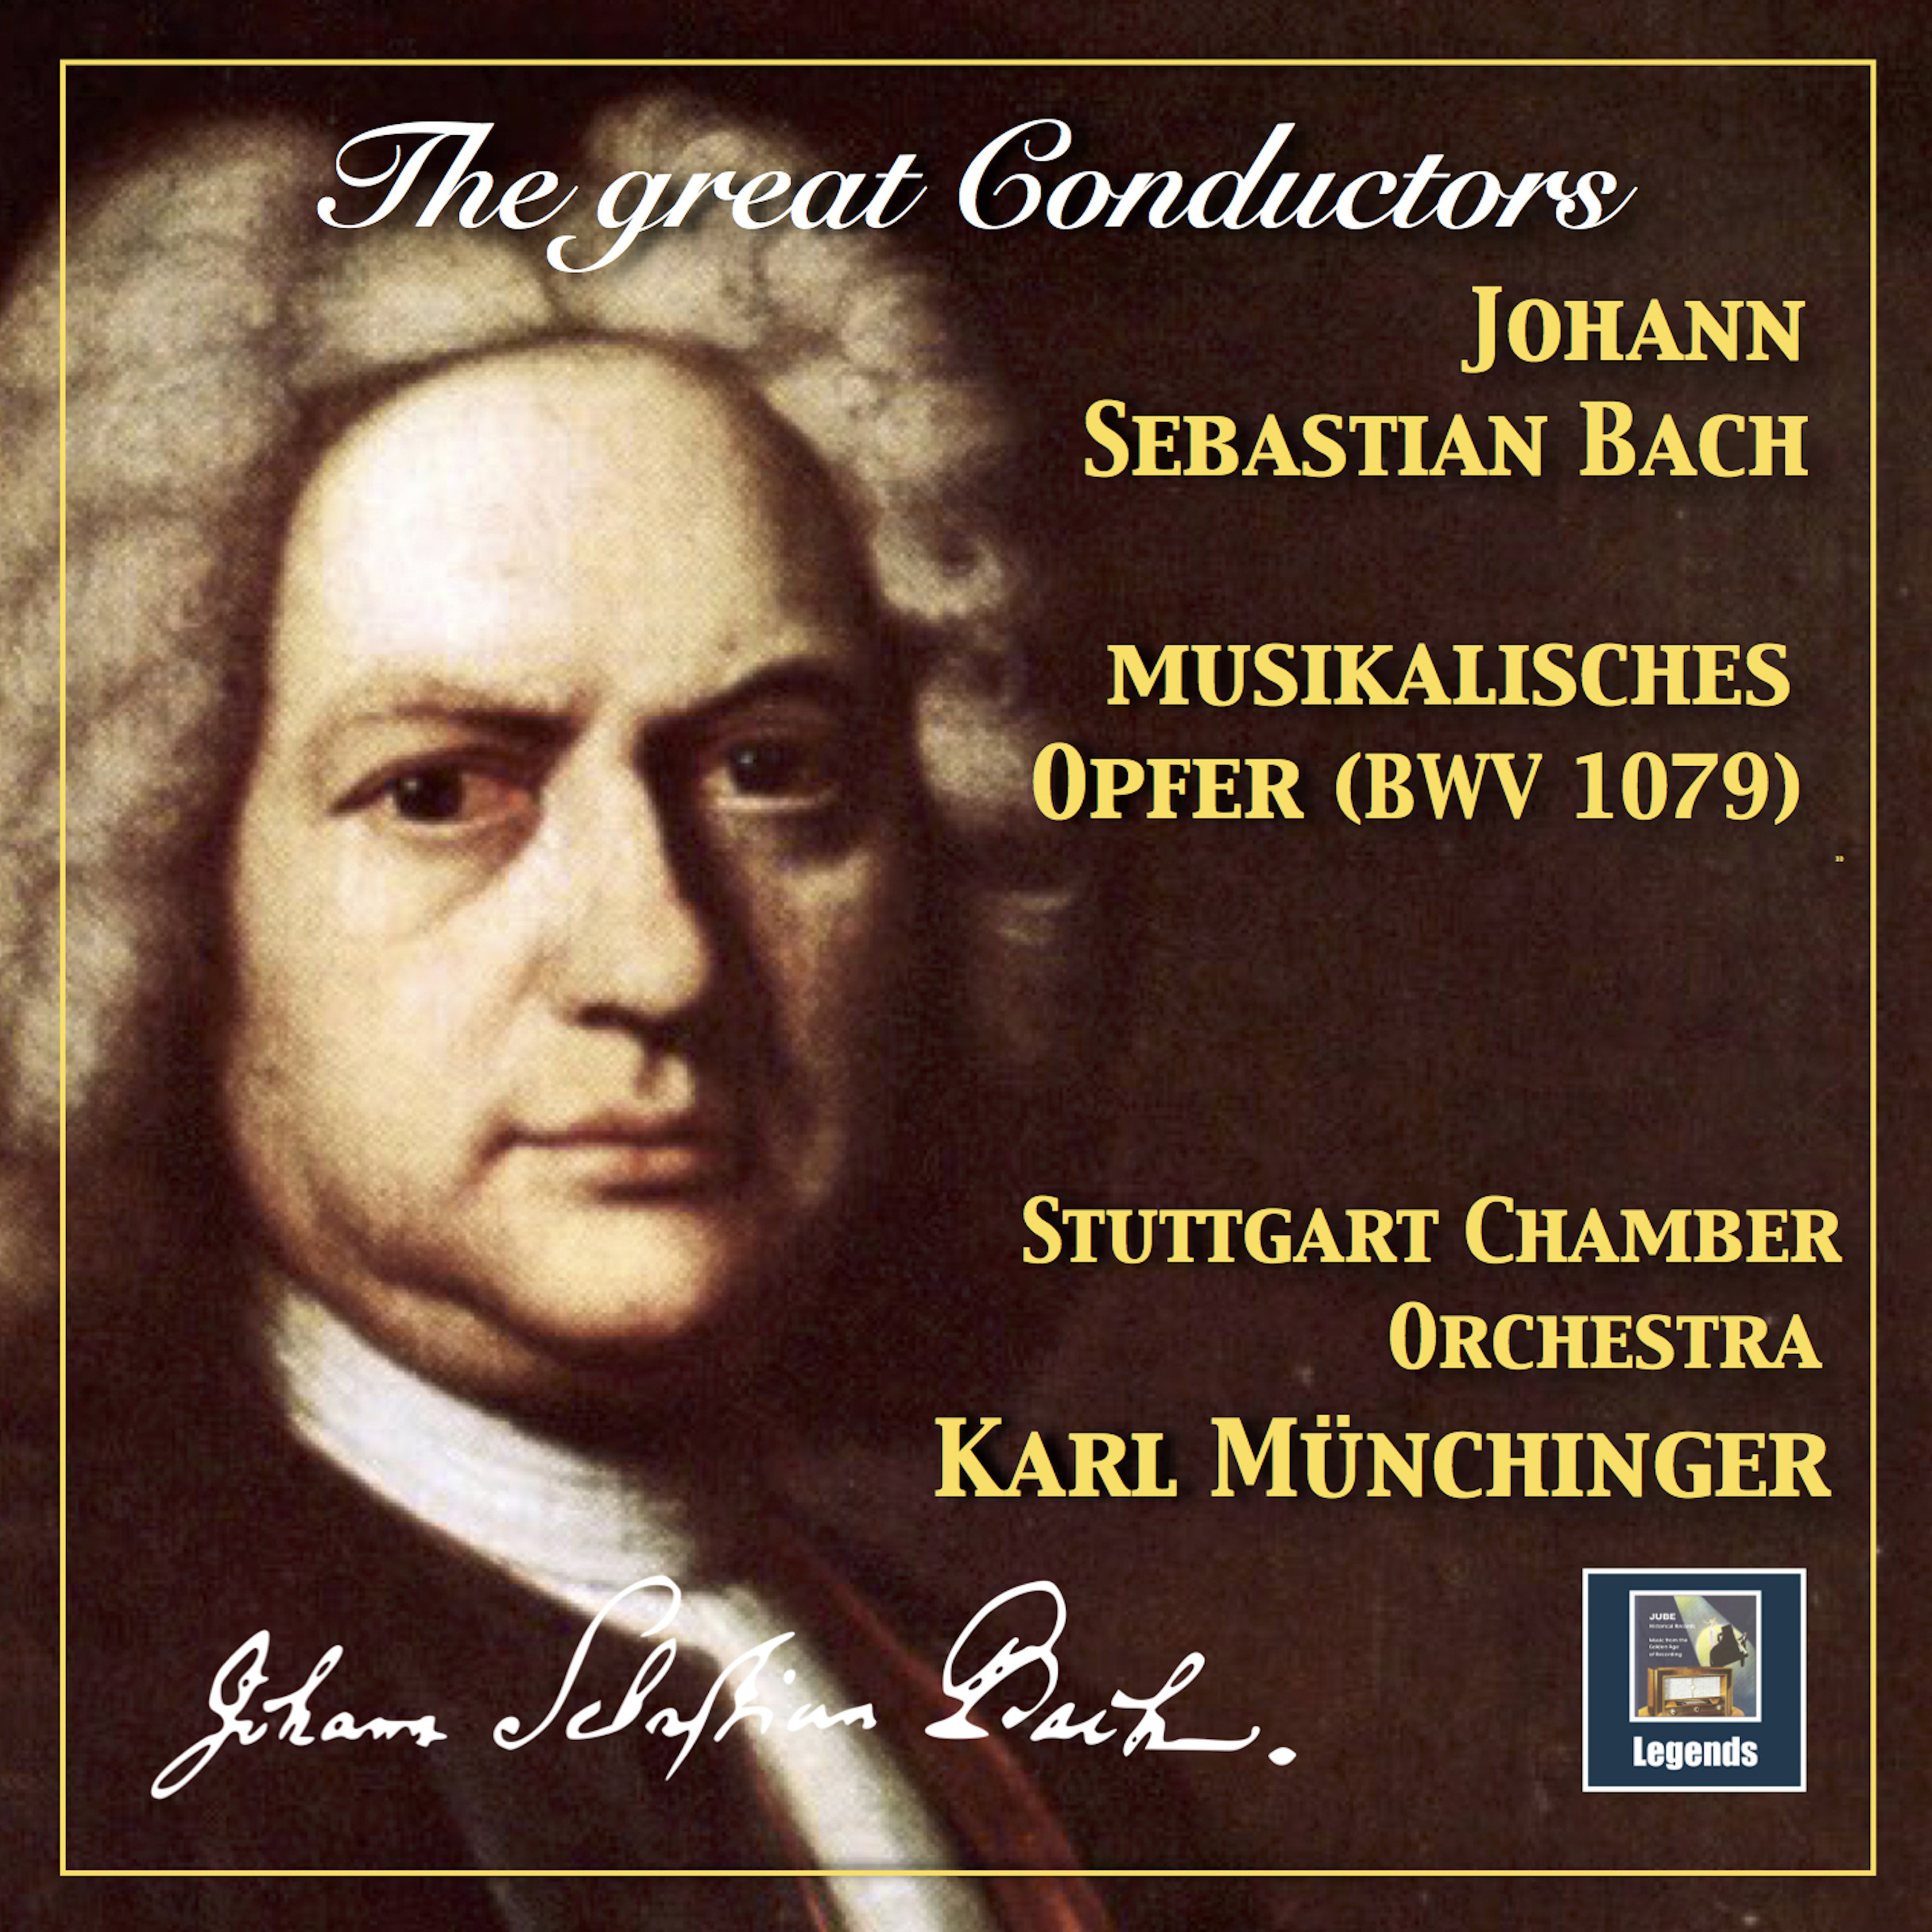 Musikalisches Opfer, BWV 1079 (Arr. K. Münchinger for Chamber Orchestra): Fuga canonica in epidiapente